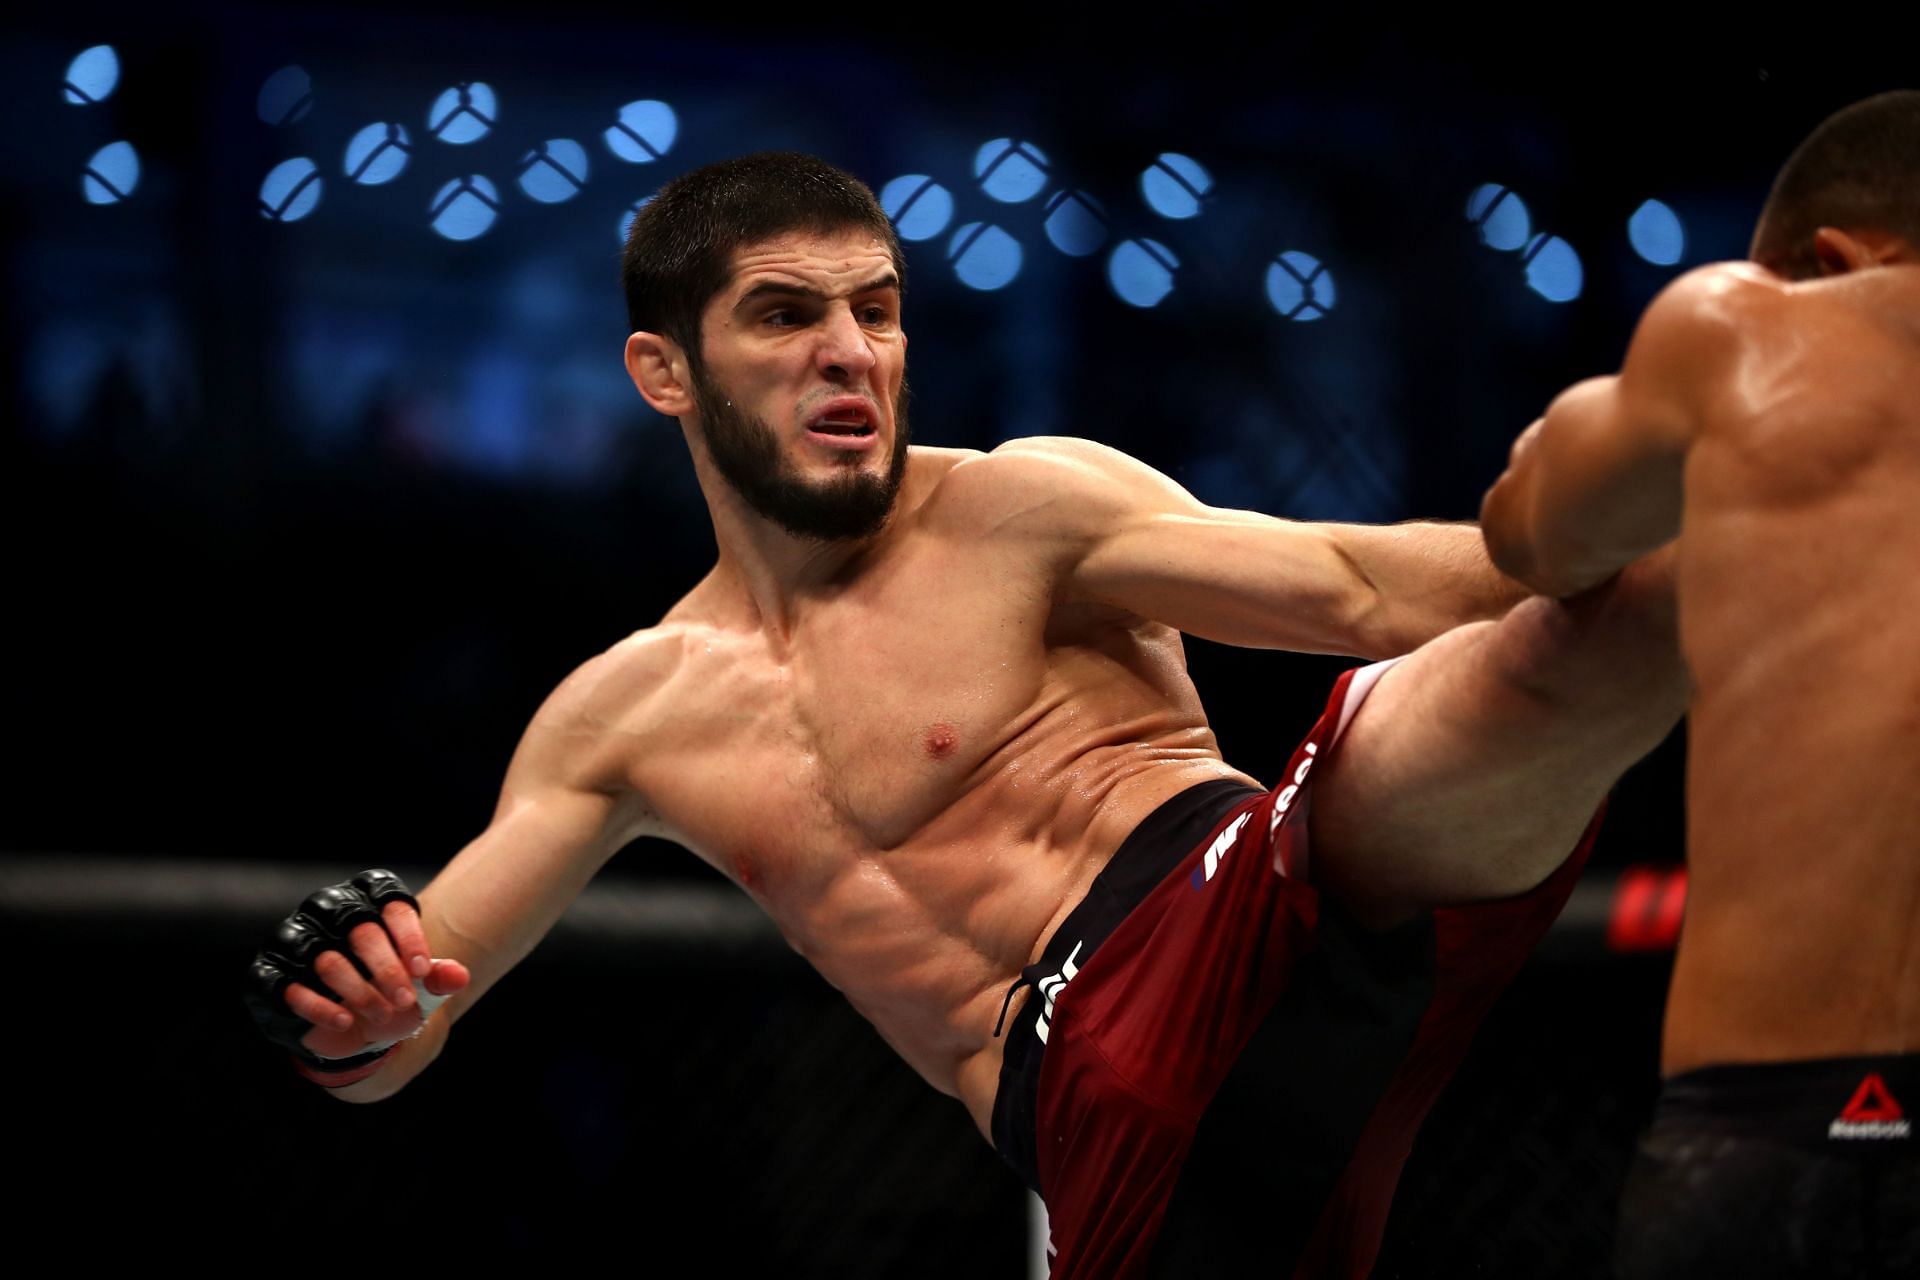 Islam Makhachev has a record of 21-1